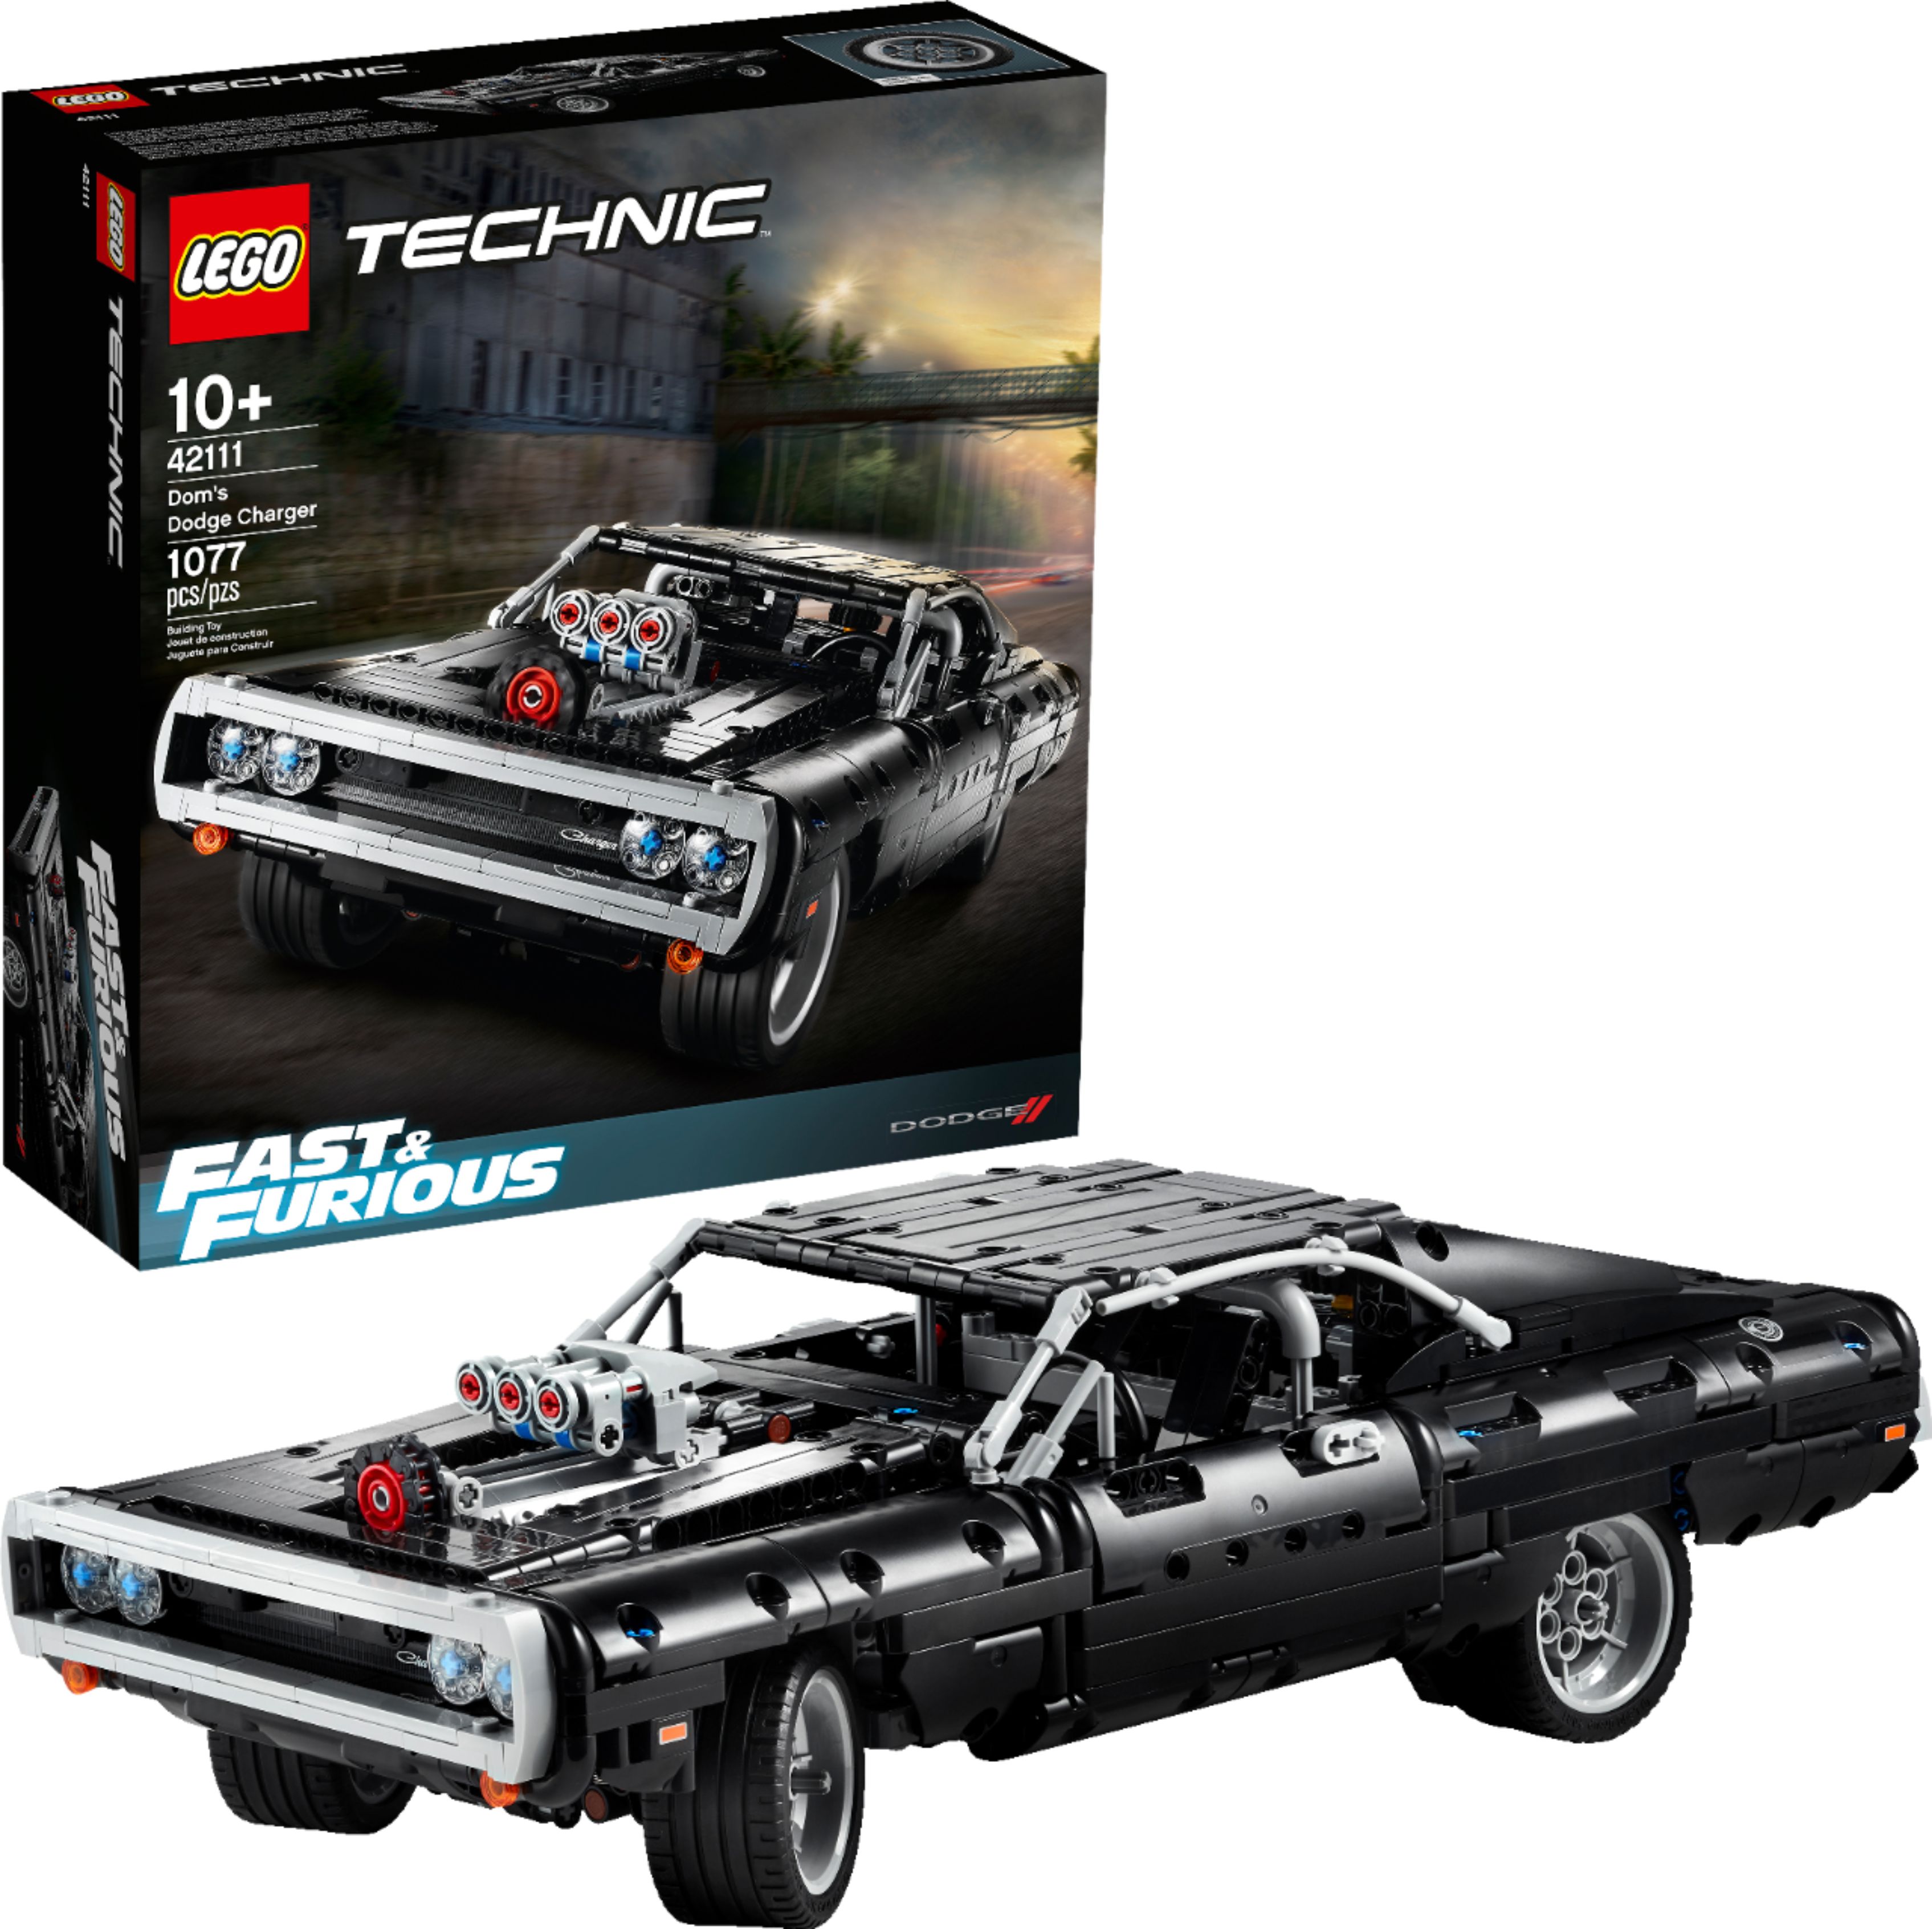 LEGO Technic Fast & Furious Dom's Dodge Charger 42111 Race 